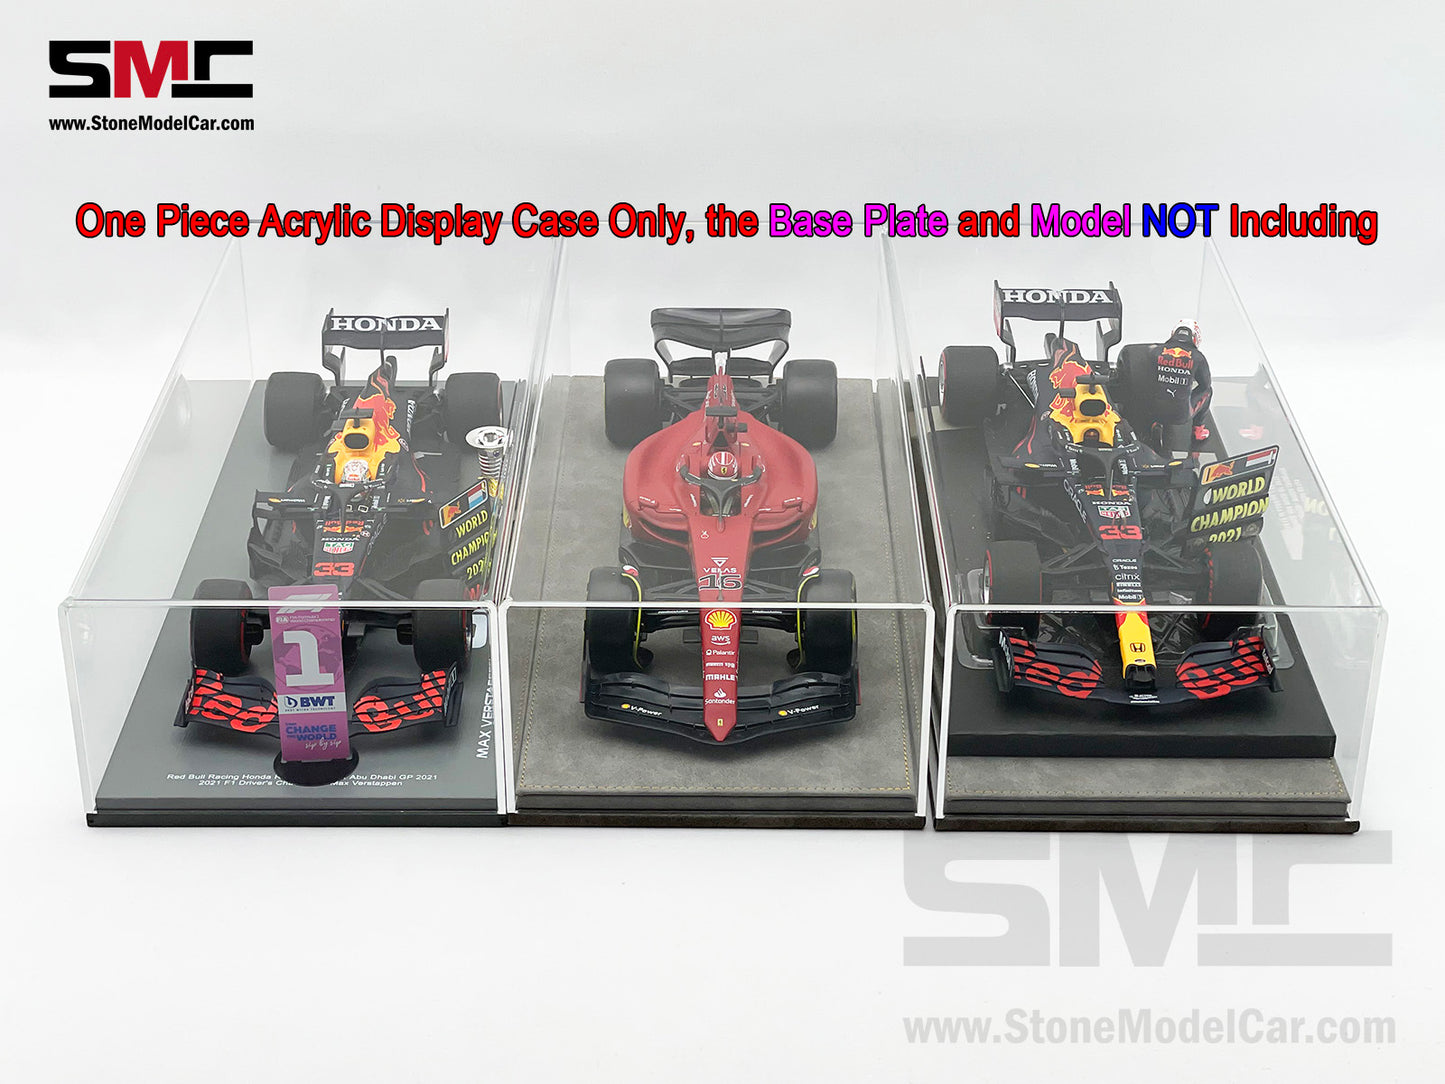 Premium Acrylic Display Cover & Show Case Replacement for 1:18 Spark F1 Car Models